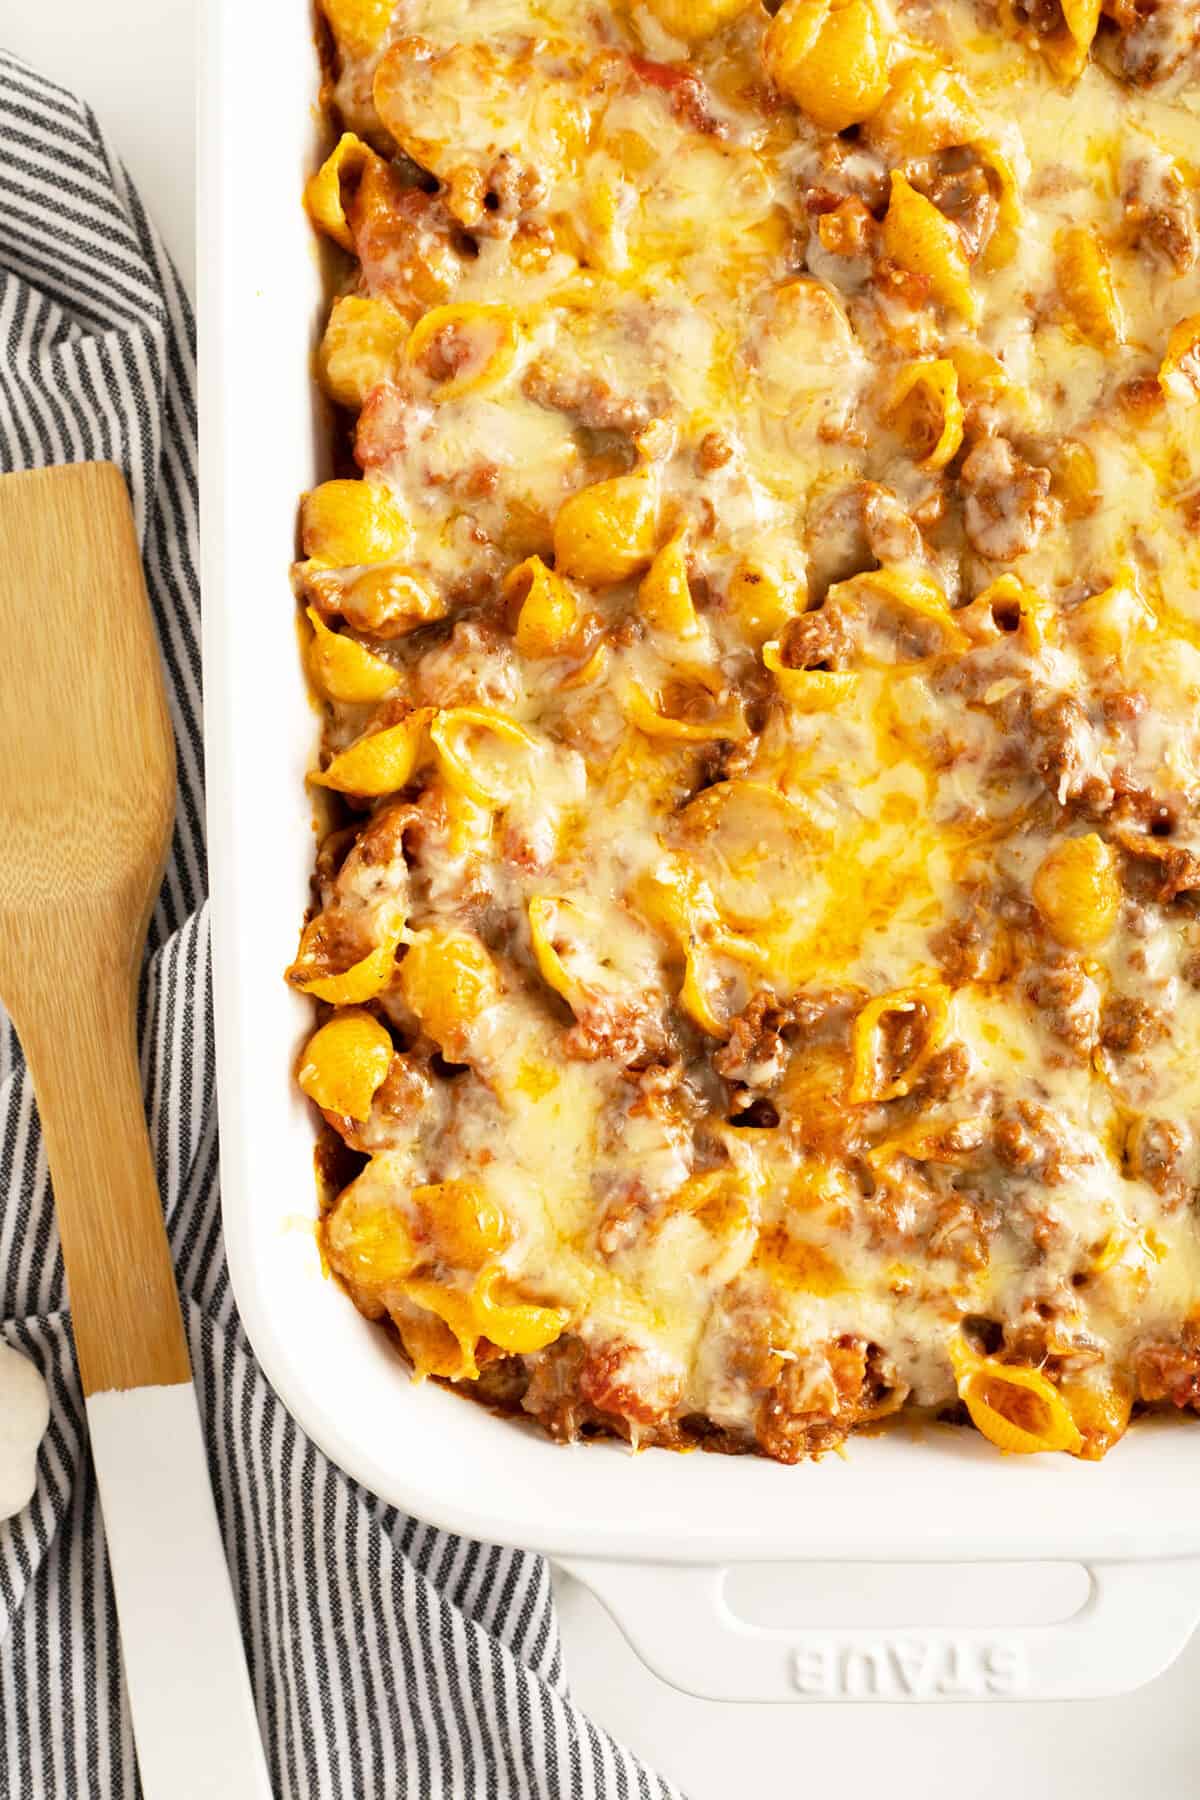 pasta bake in a white baking tray with melted cheese over the top